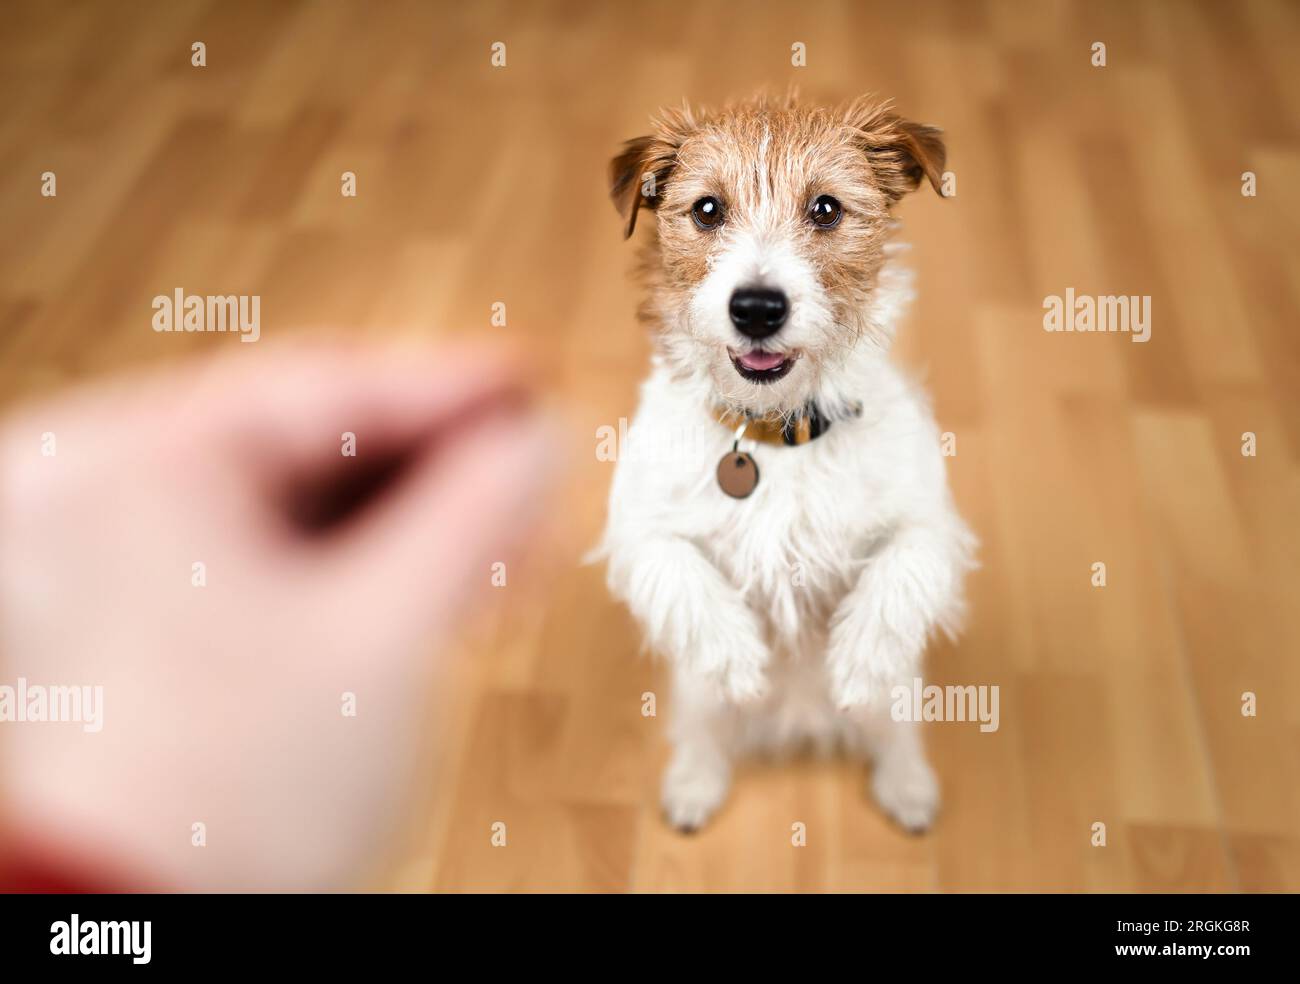 Cute dog begging for snack food. Puppy training background. Stock Photo